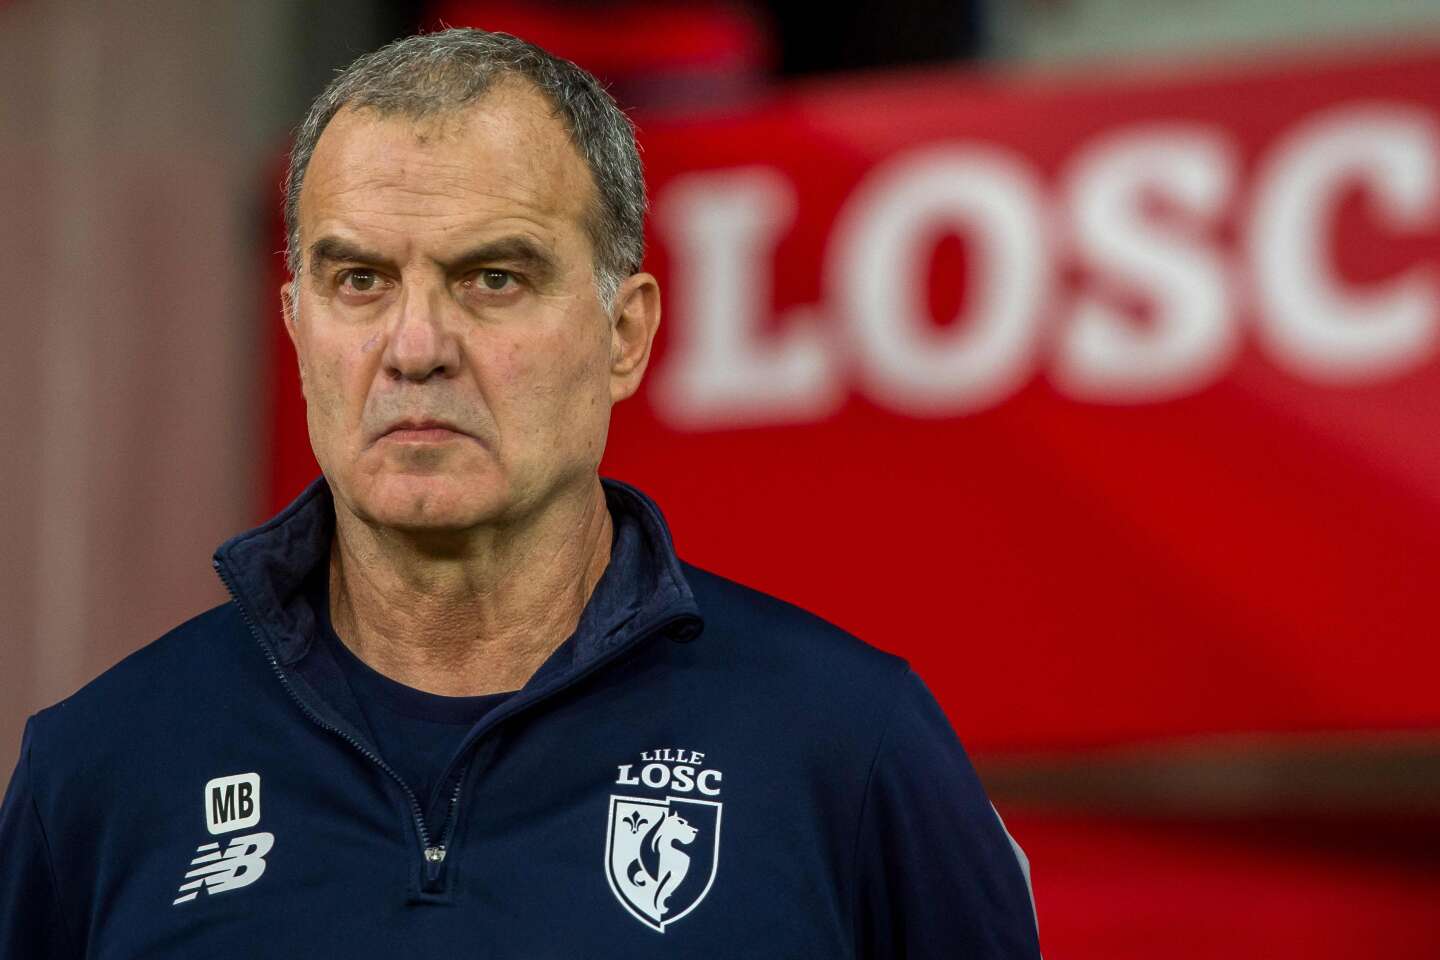 LOSC ordered to pay 2 million euros to its former coach Marcelo Bielsa, six years after his departure